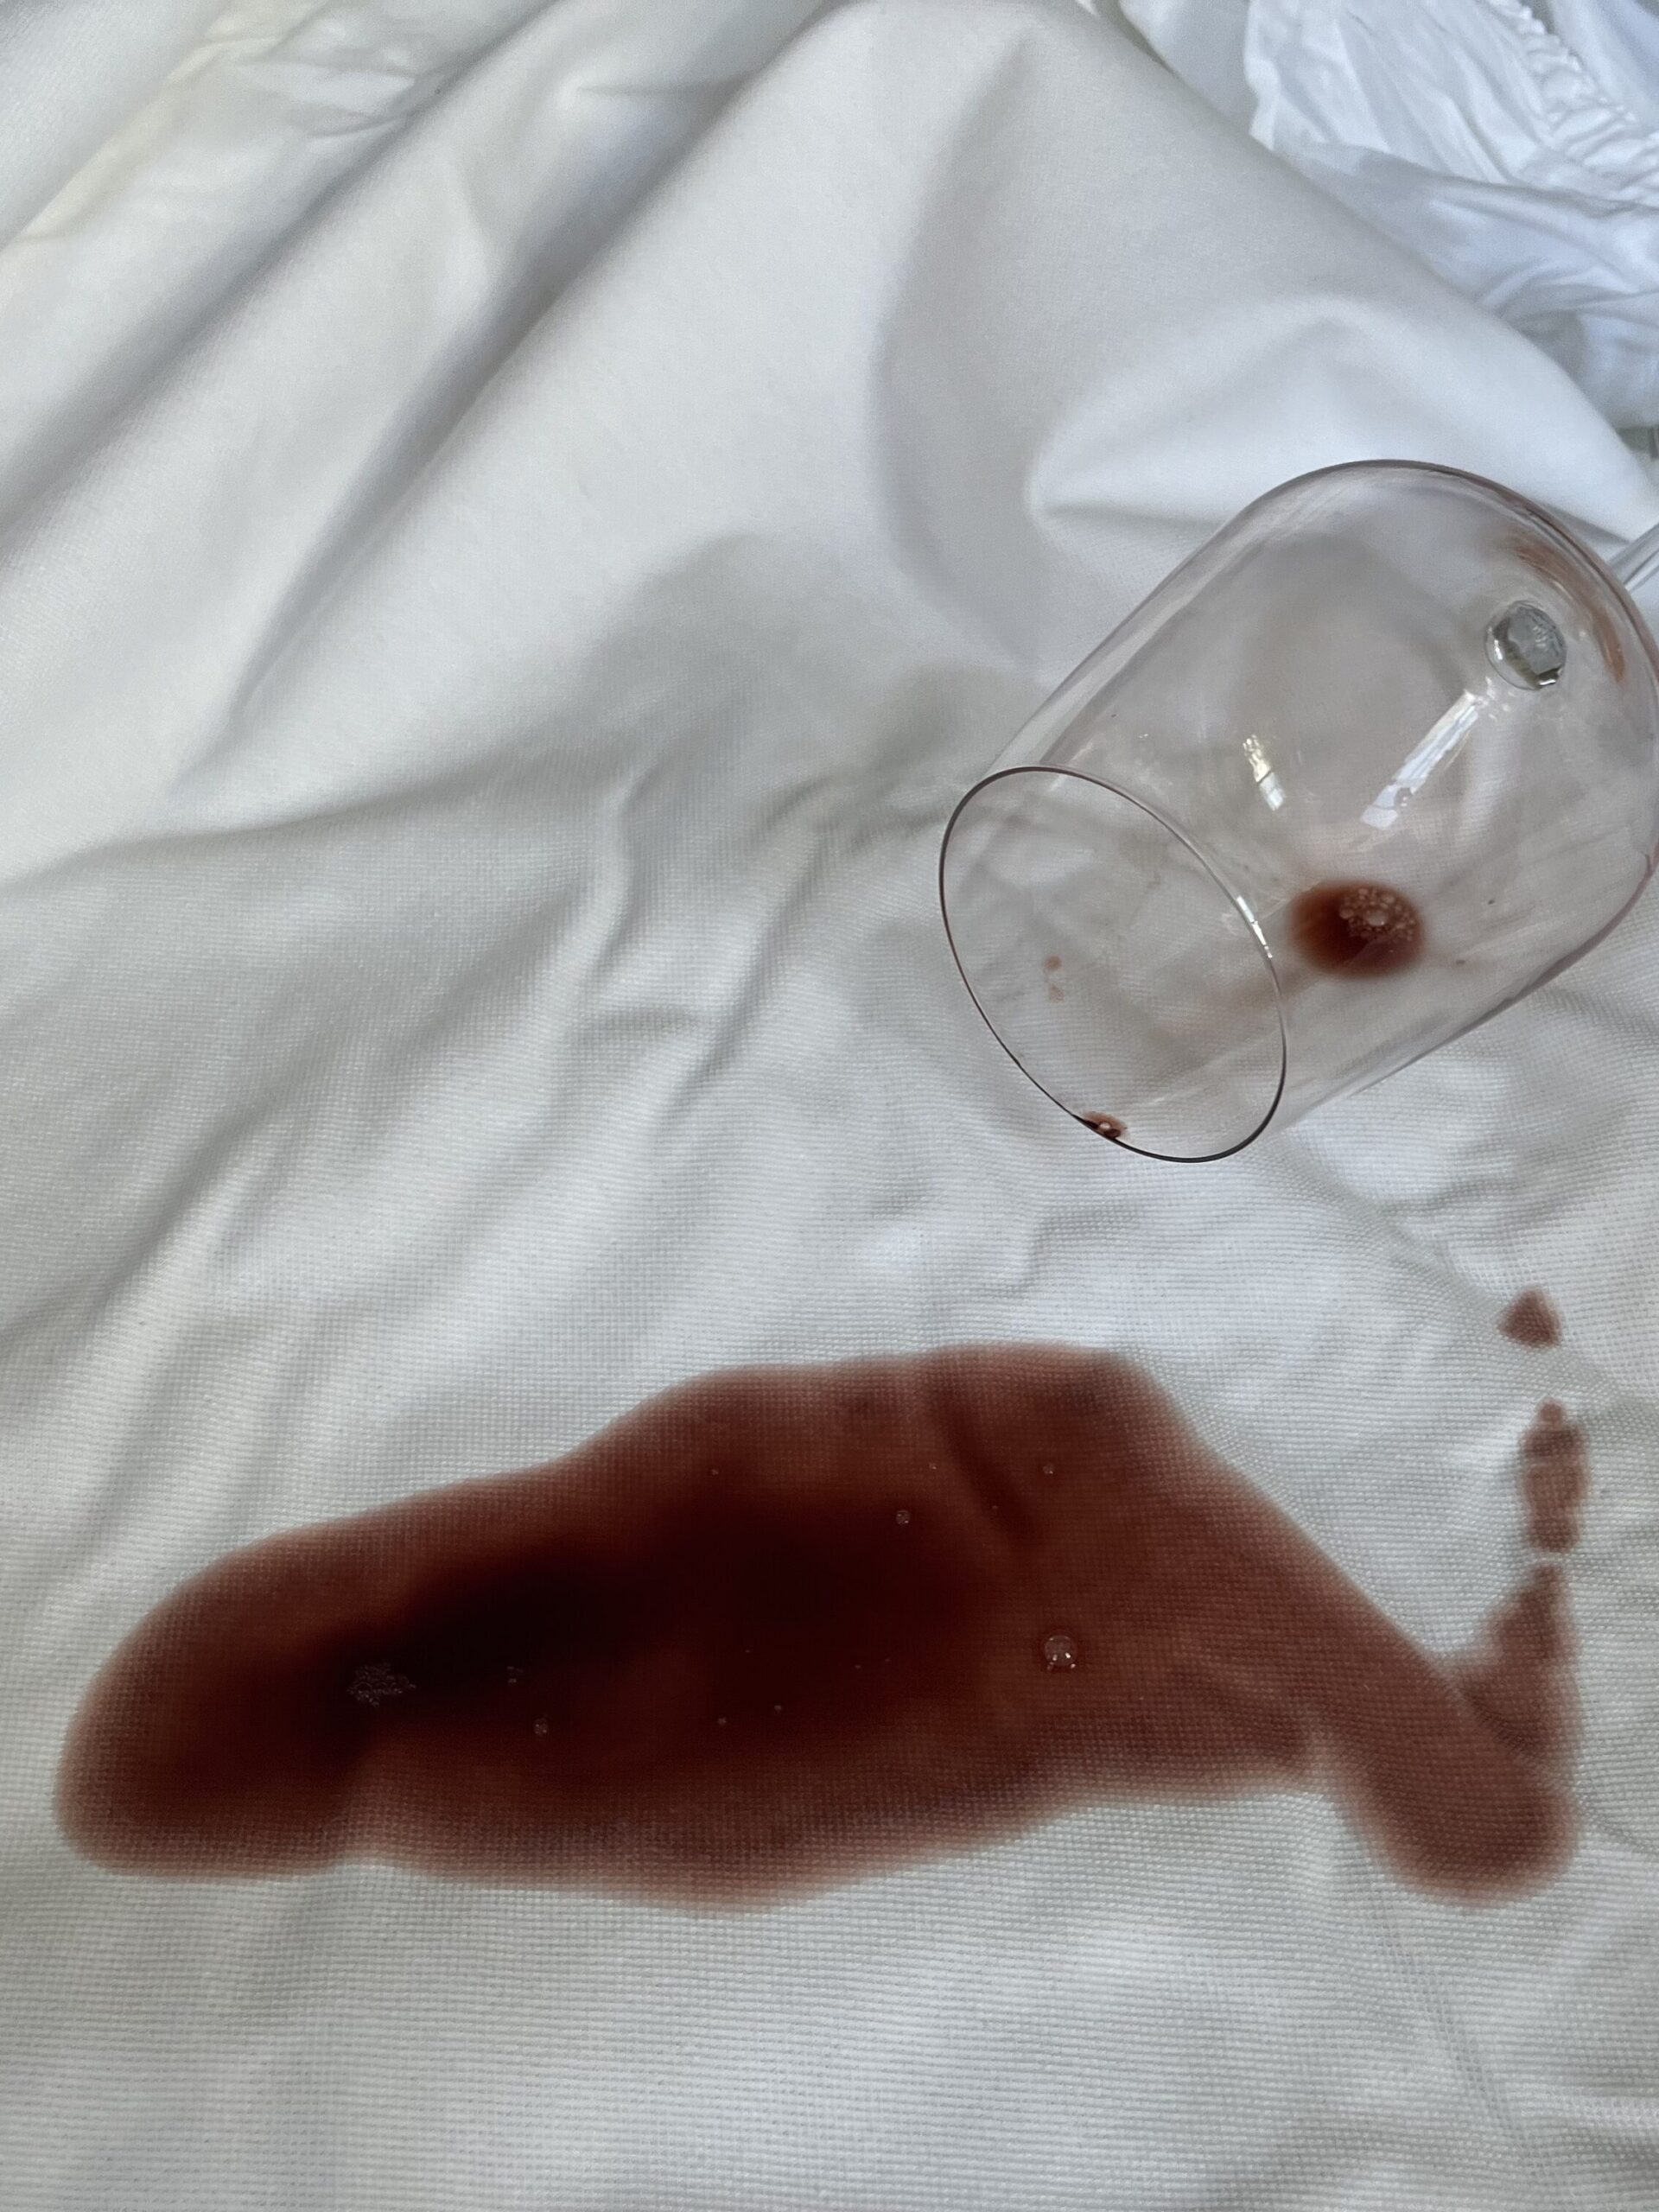 A wine spill on the mattress protector from Nest